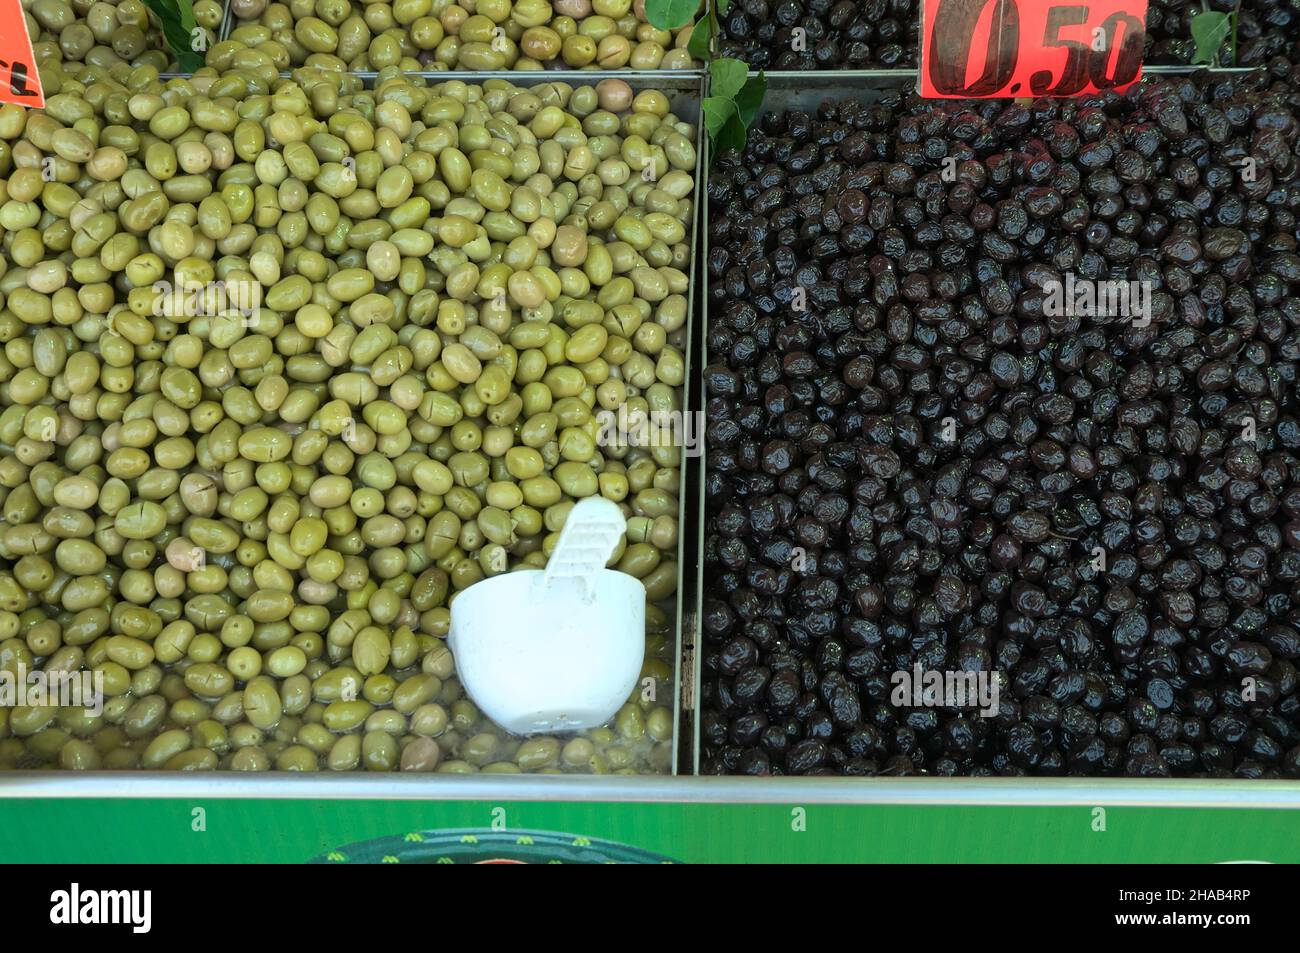 economy and tourism in Turkey green and black olives a mediterranean food in Istanbul's Grand Bazaar Stock Photo